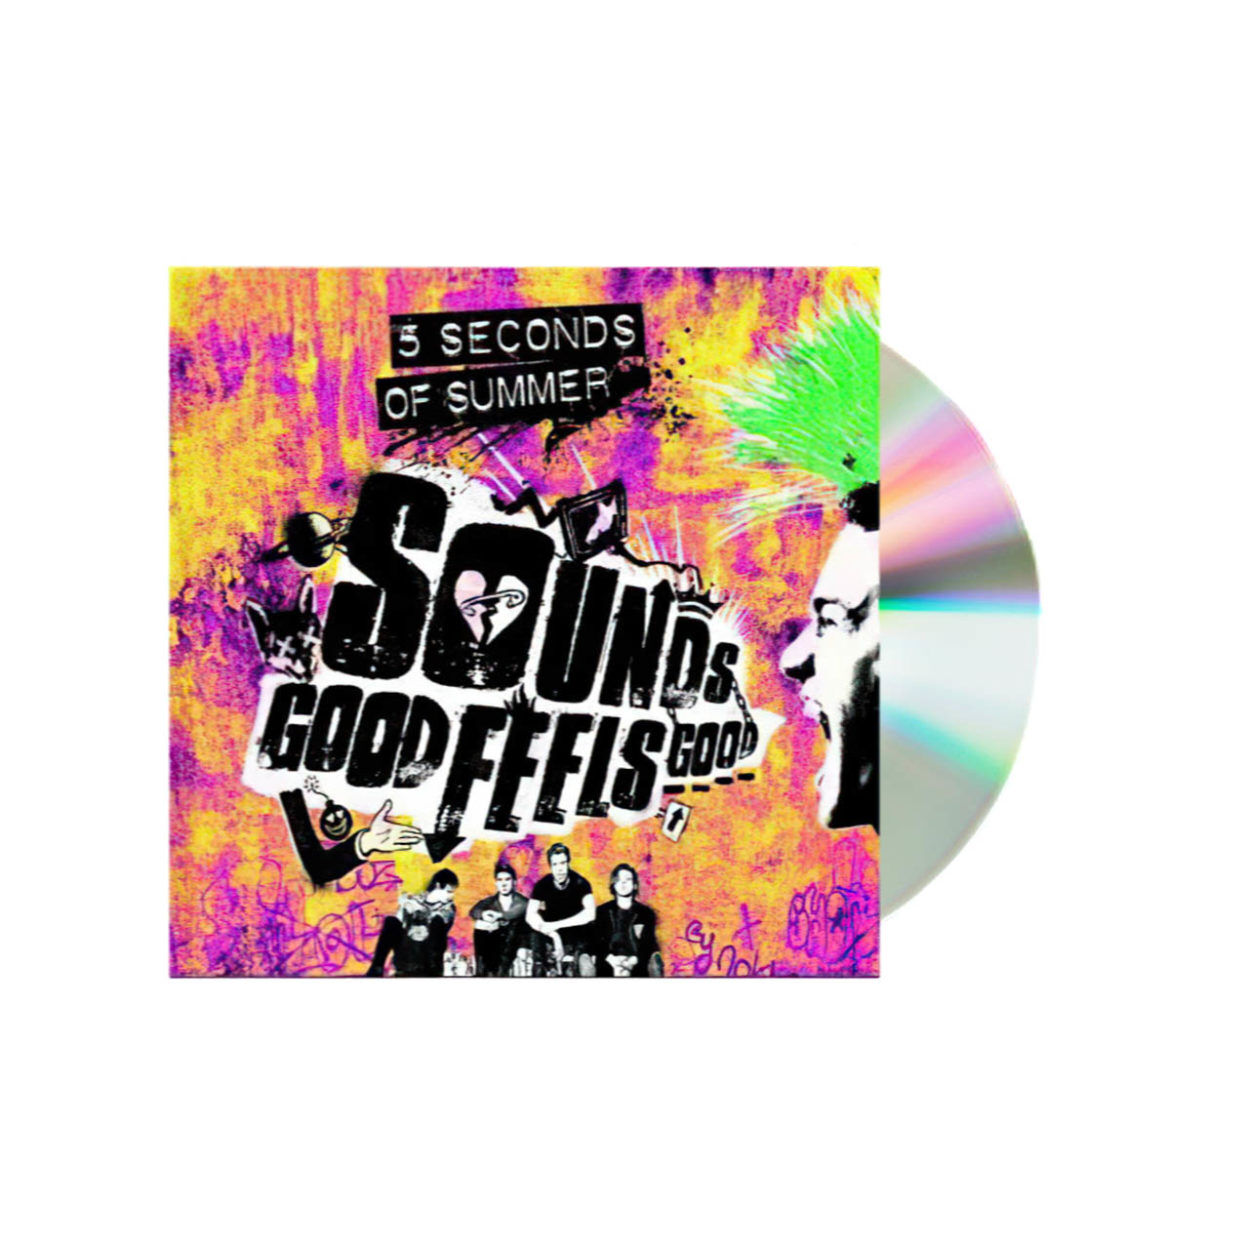 5 Seconds of summer sounds good feels good deluxe cd